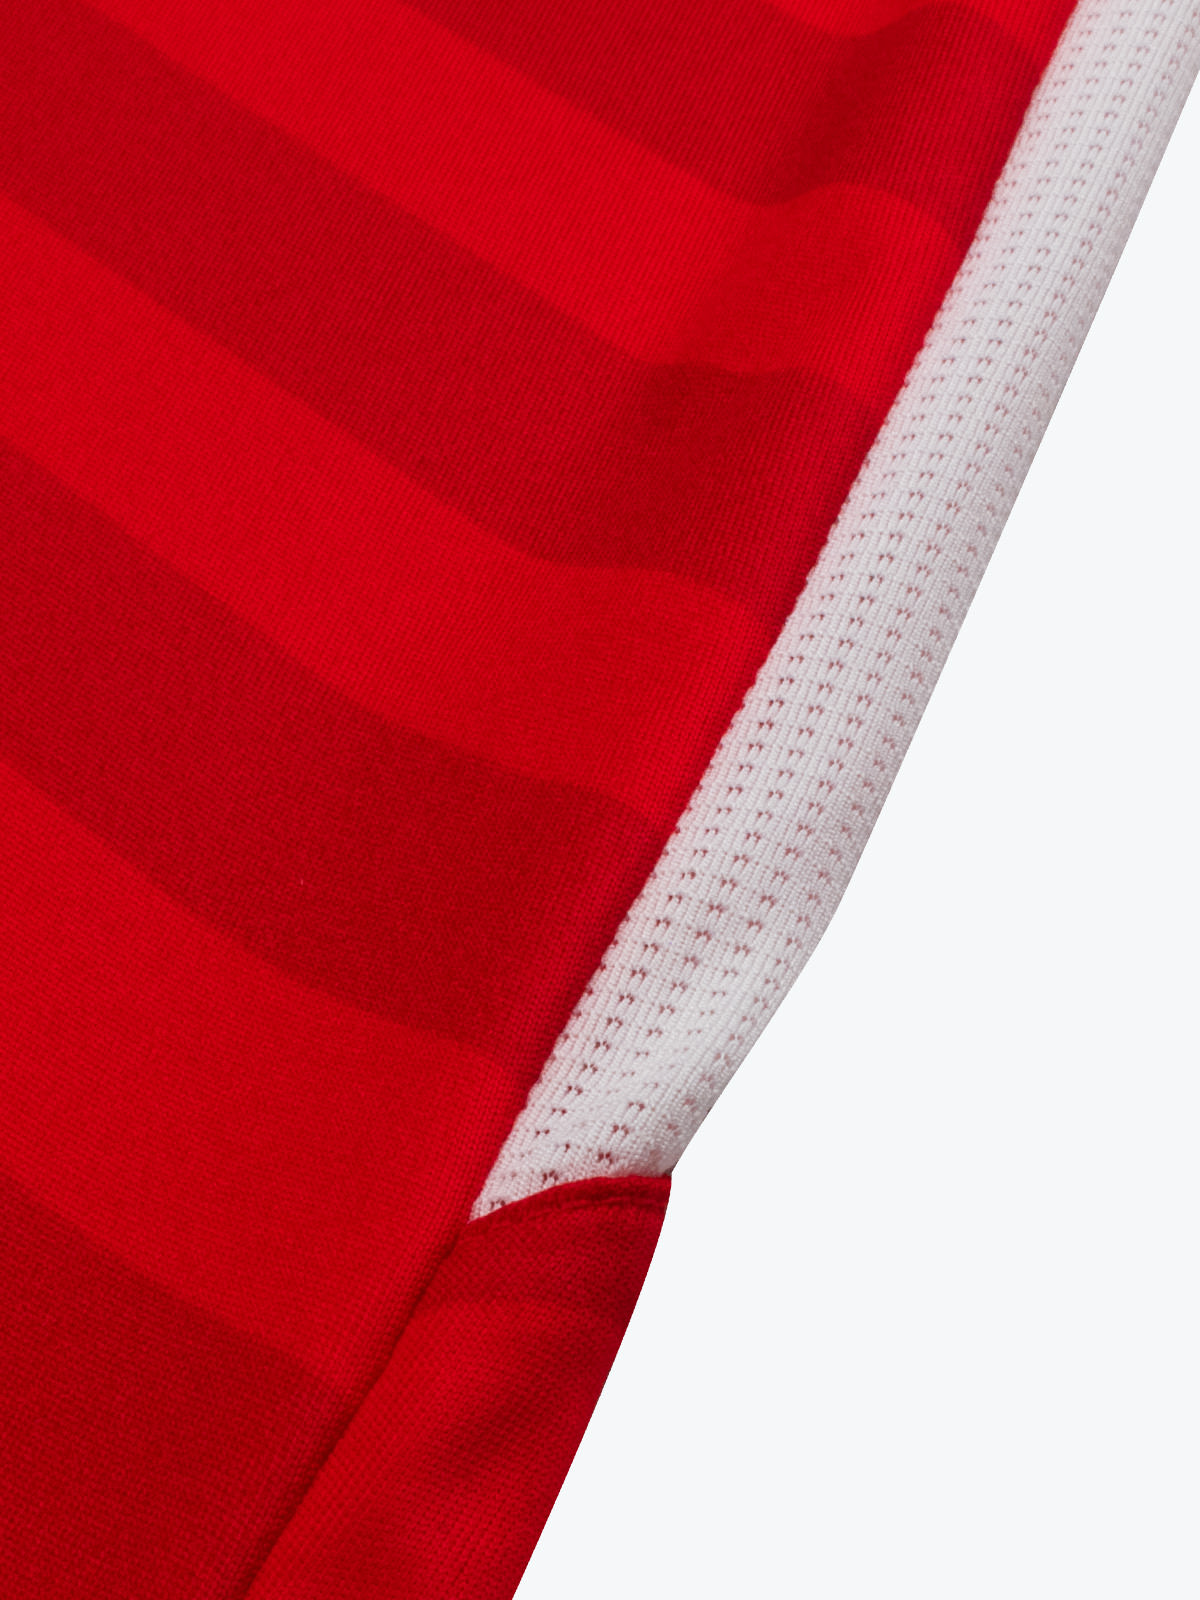 picture of team id pro stripe jersey - red/black